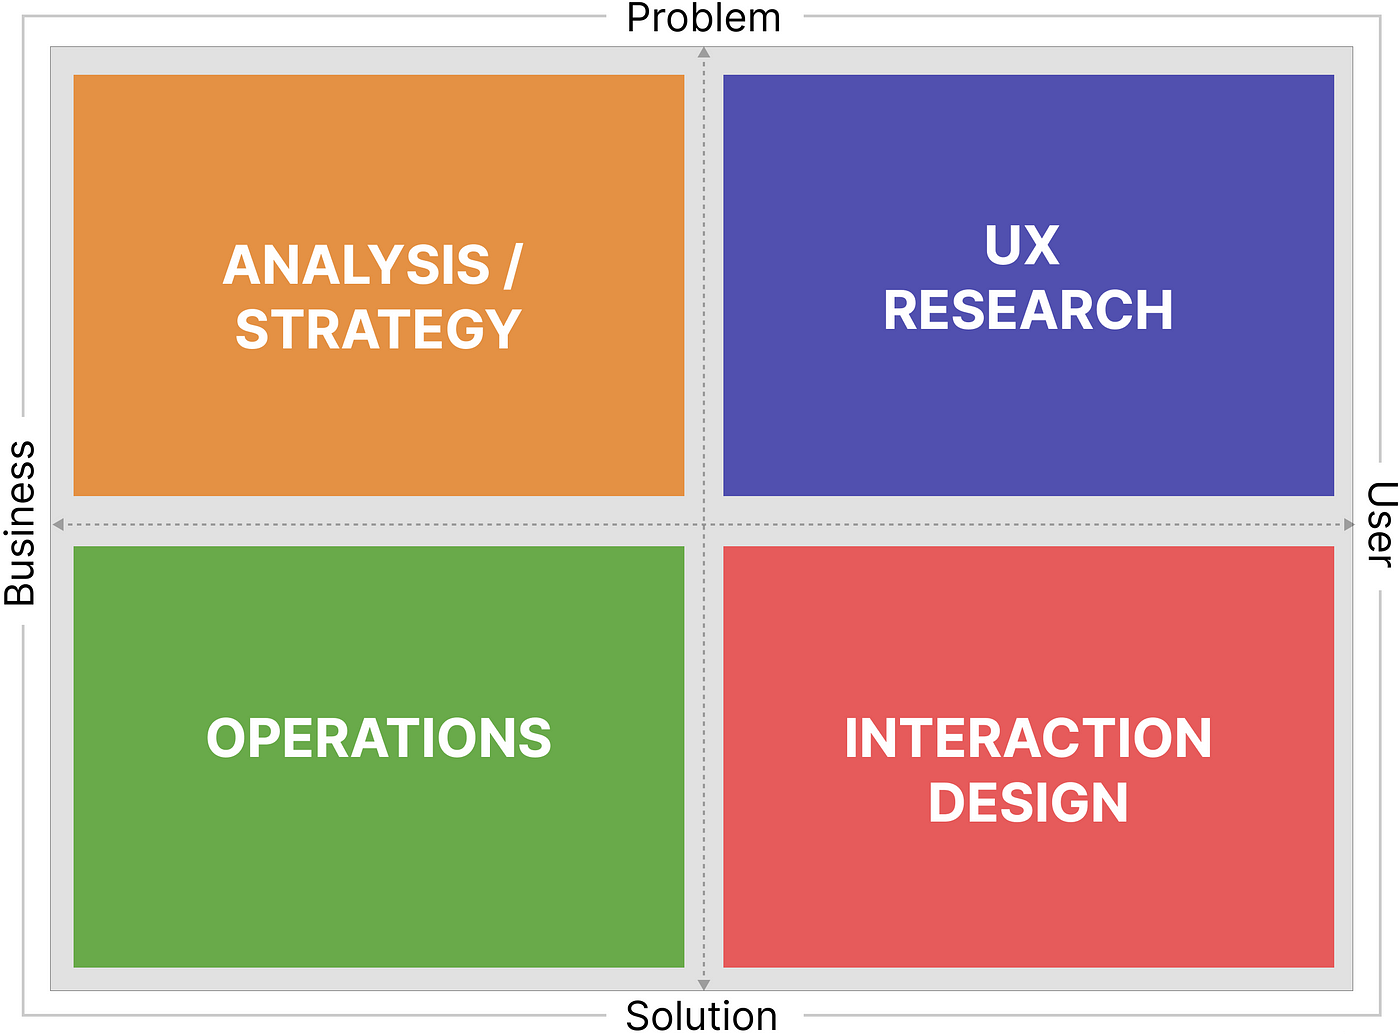 Which of the million UX roles suits you best? A personality type